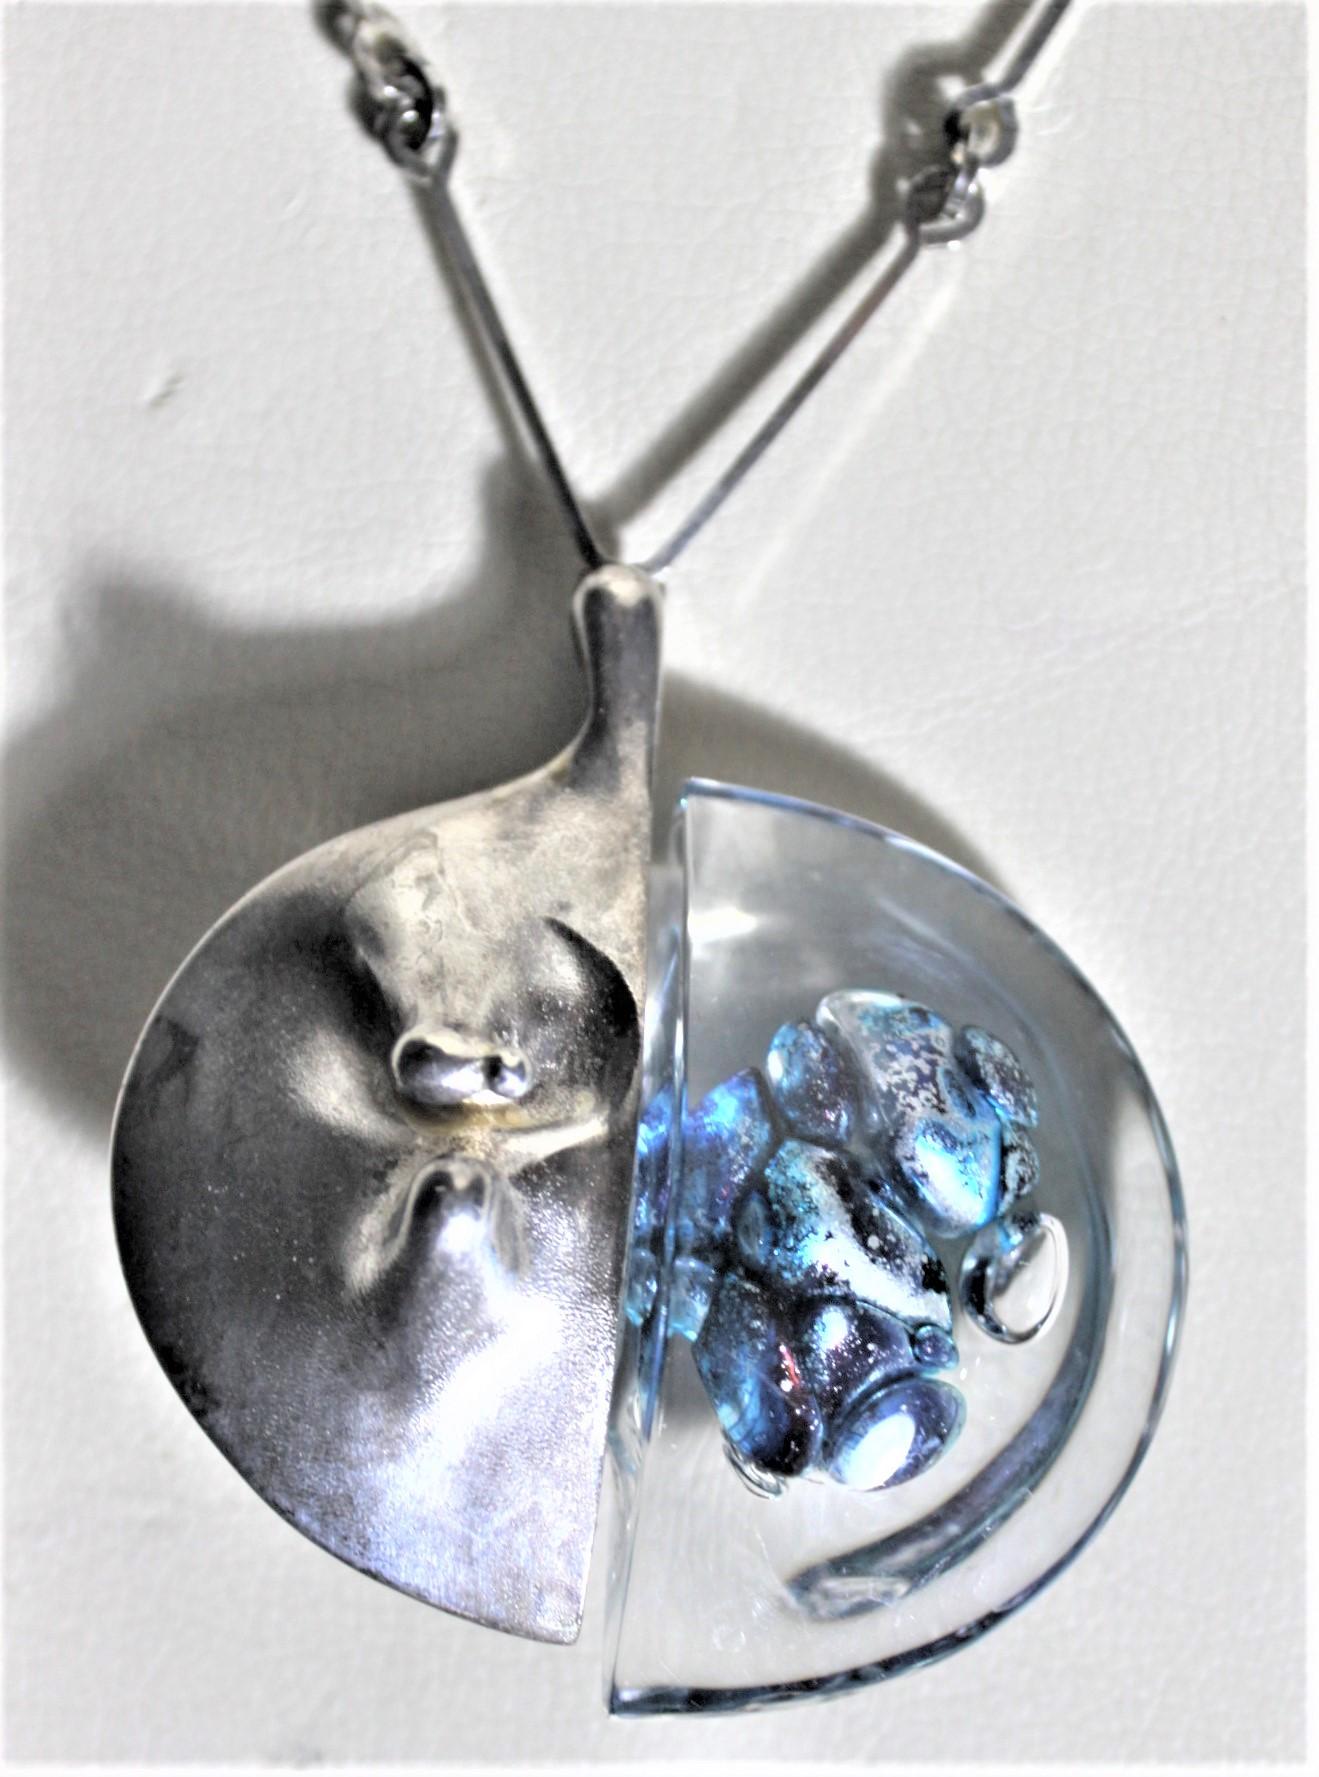 Hand-Crafted Bjorn Weckstrom Lapponia Sterling Silver & Acrylic 'Kilamanjaro' Pendant & Chain For Sale